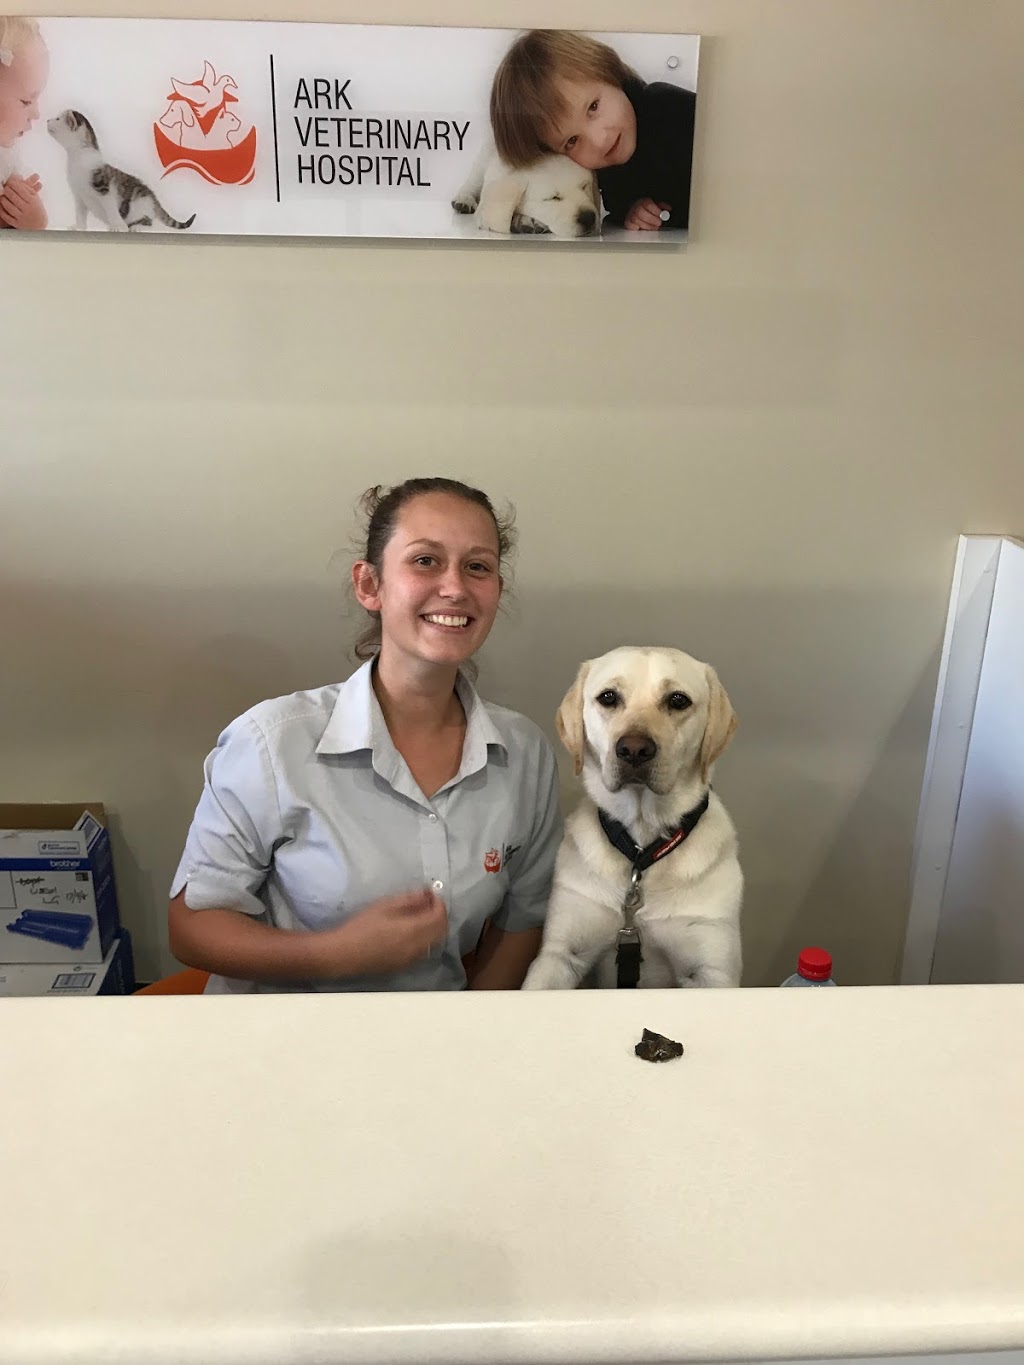 Ark Veterinary Hospital | pet store | 352 Pacific Hwy, Lindfield NSW 2070, Australia | 0294161300 OR +61 2 9416 1300